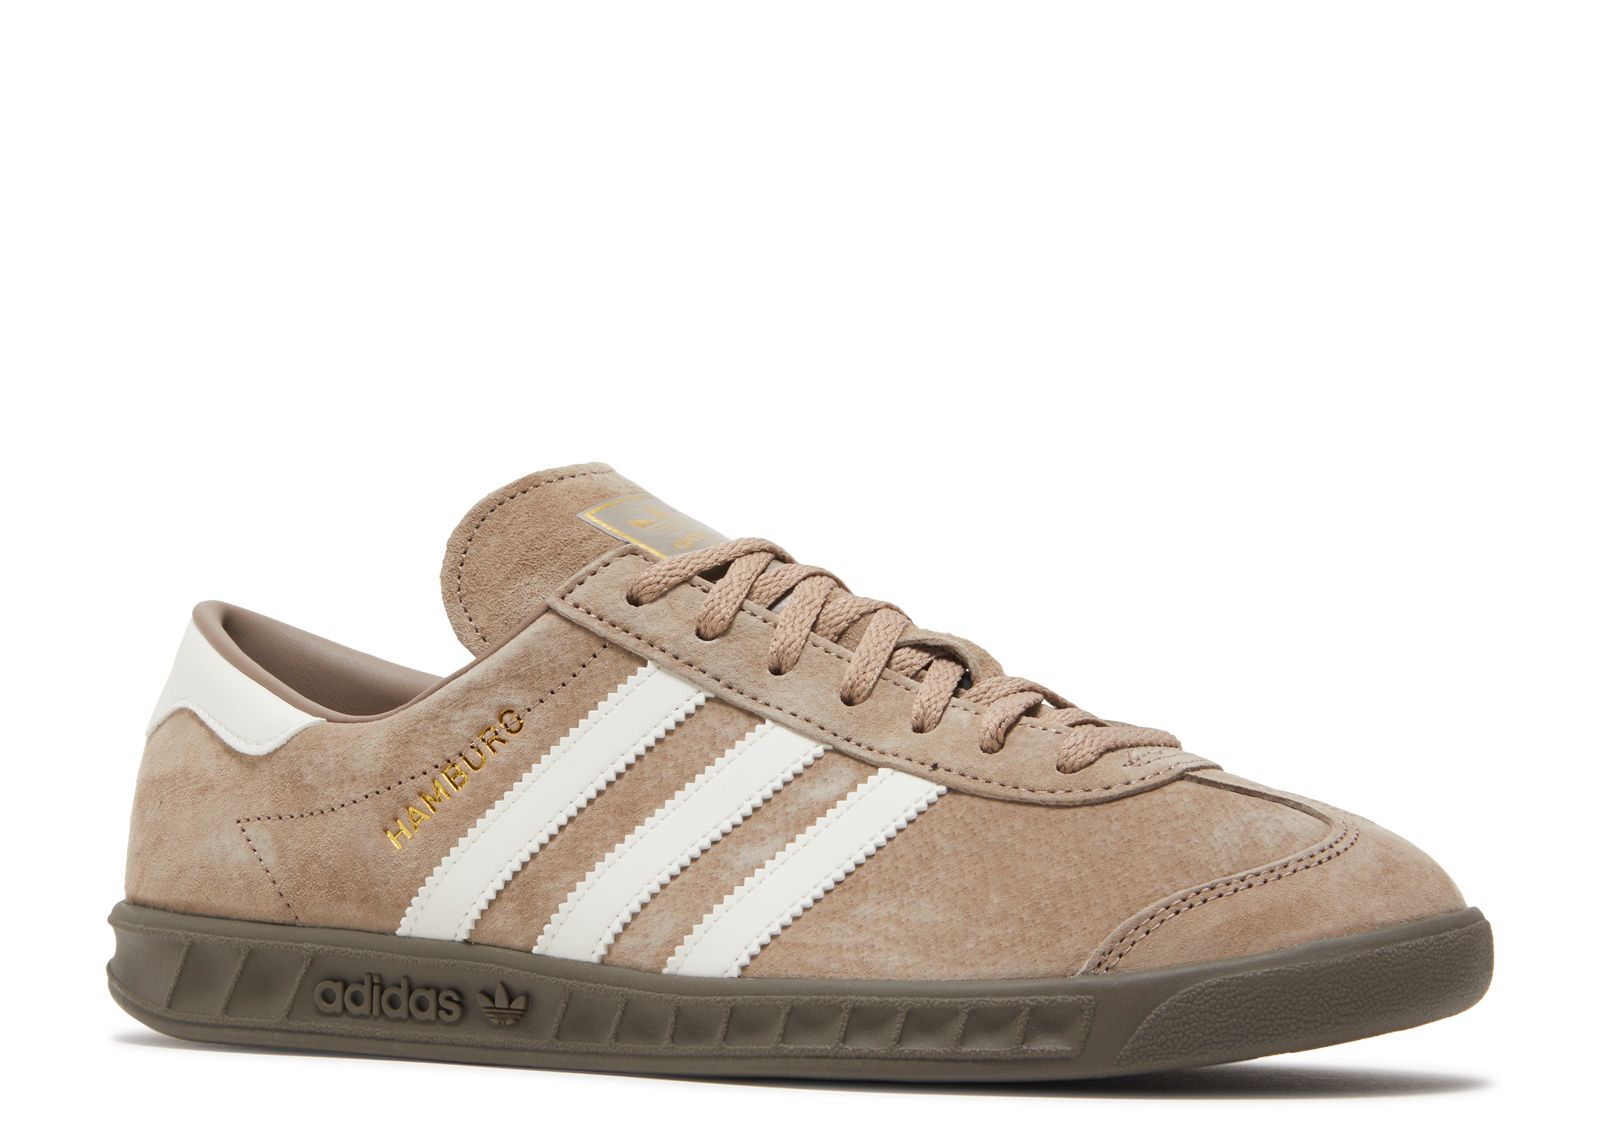 Hamburg 'Chalky Brown' - Adidas - GW9642 - chalky brown/off white ...